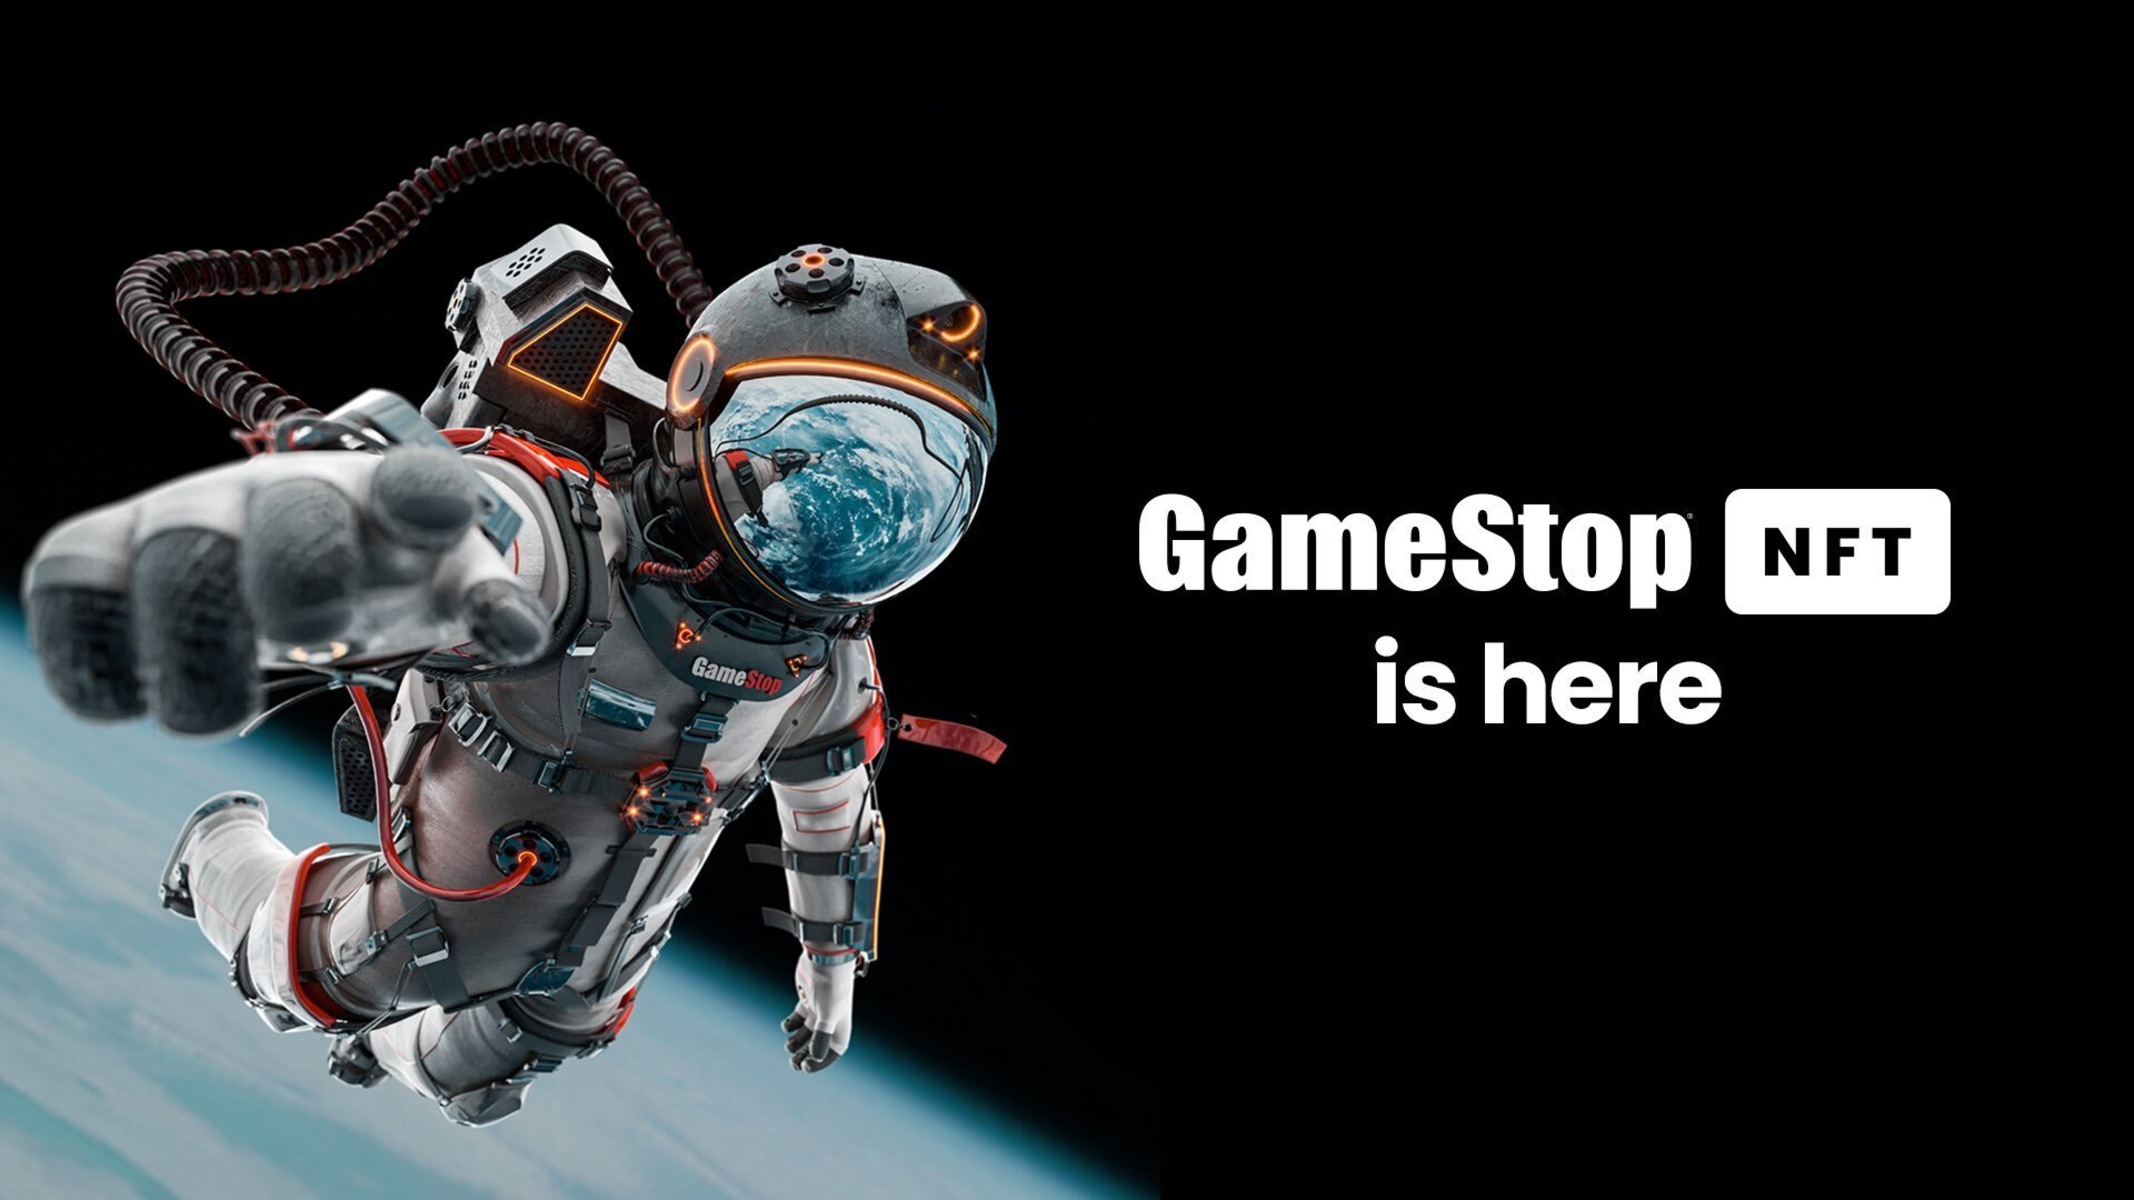 GameStopNFT on X: Same Rules. New Challenges. Check out the